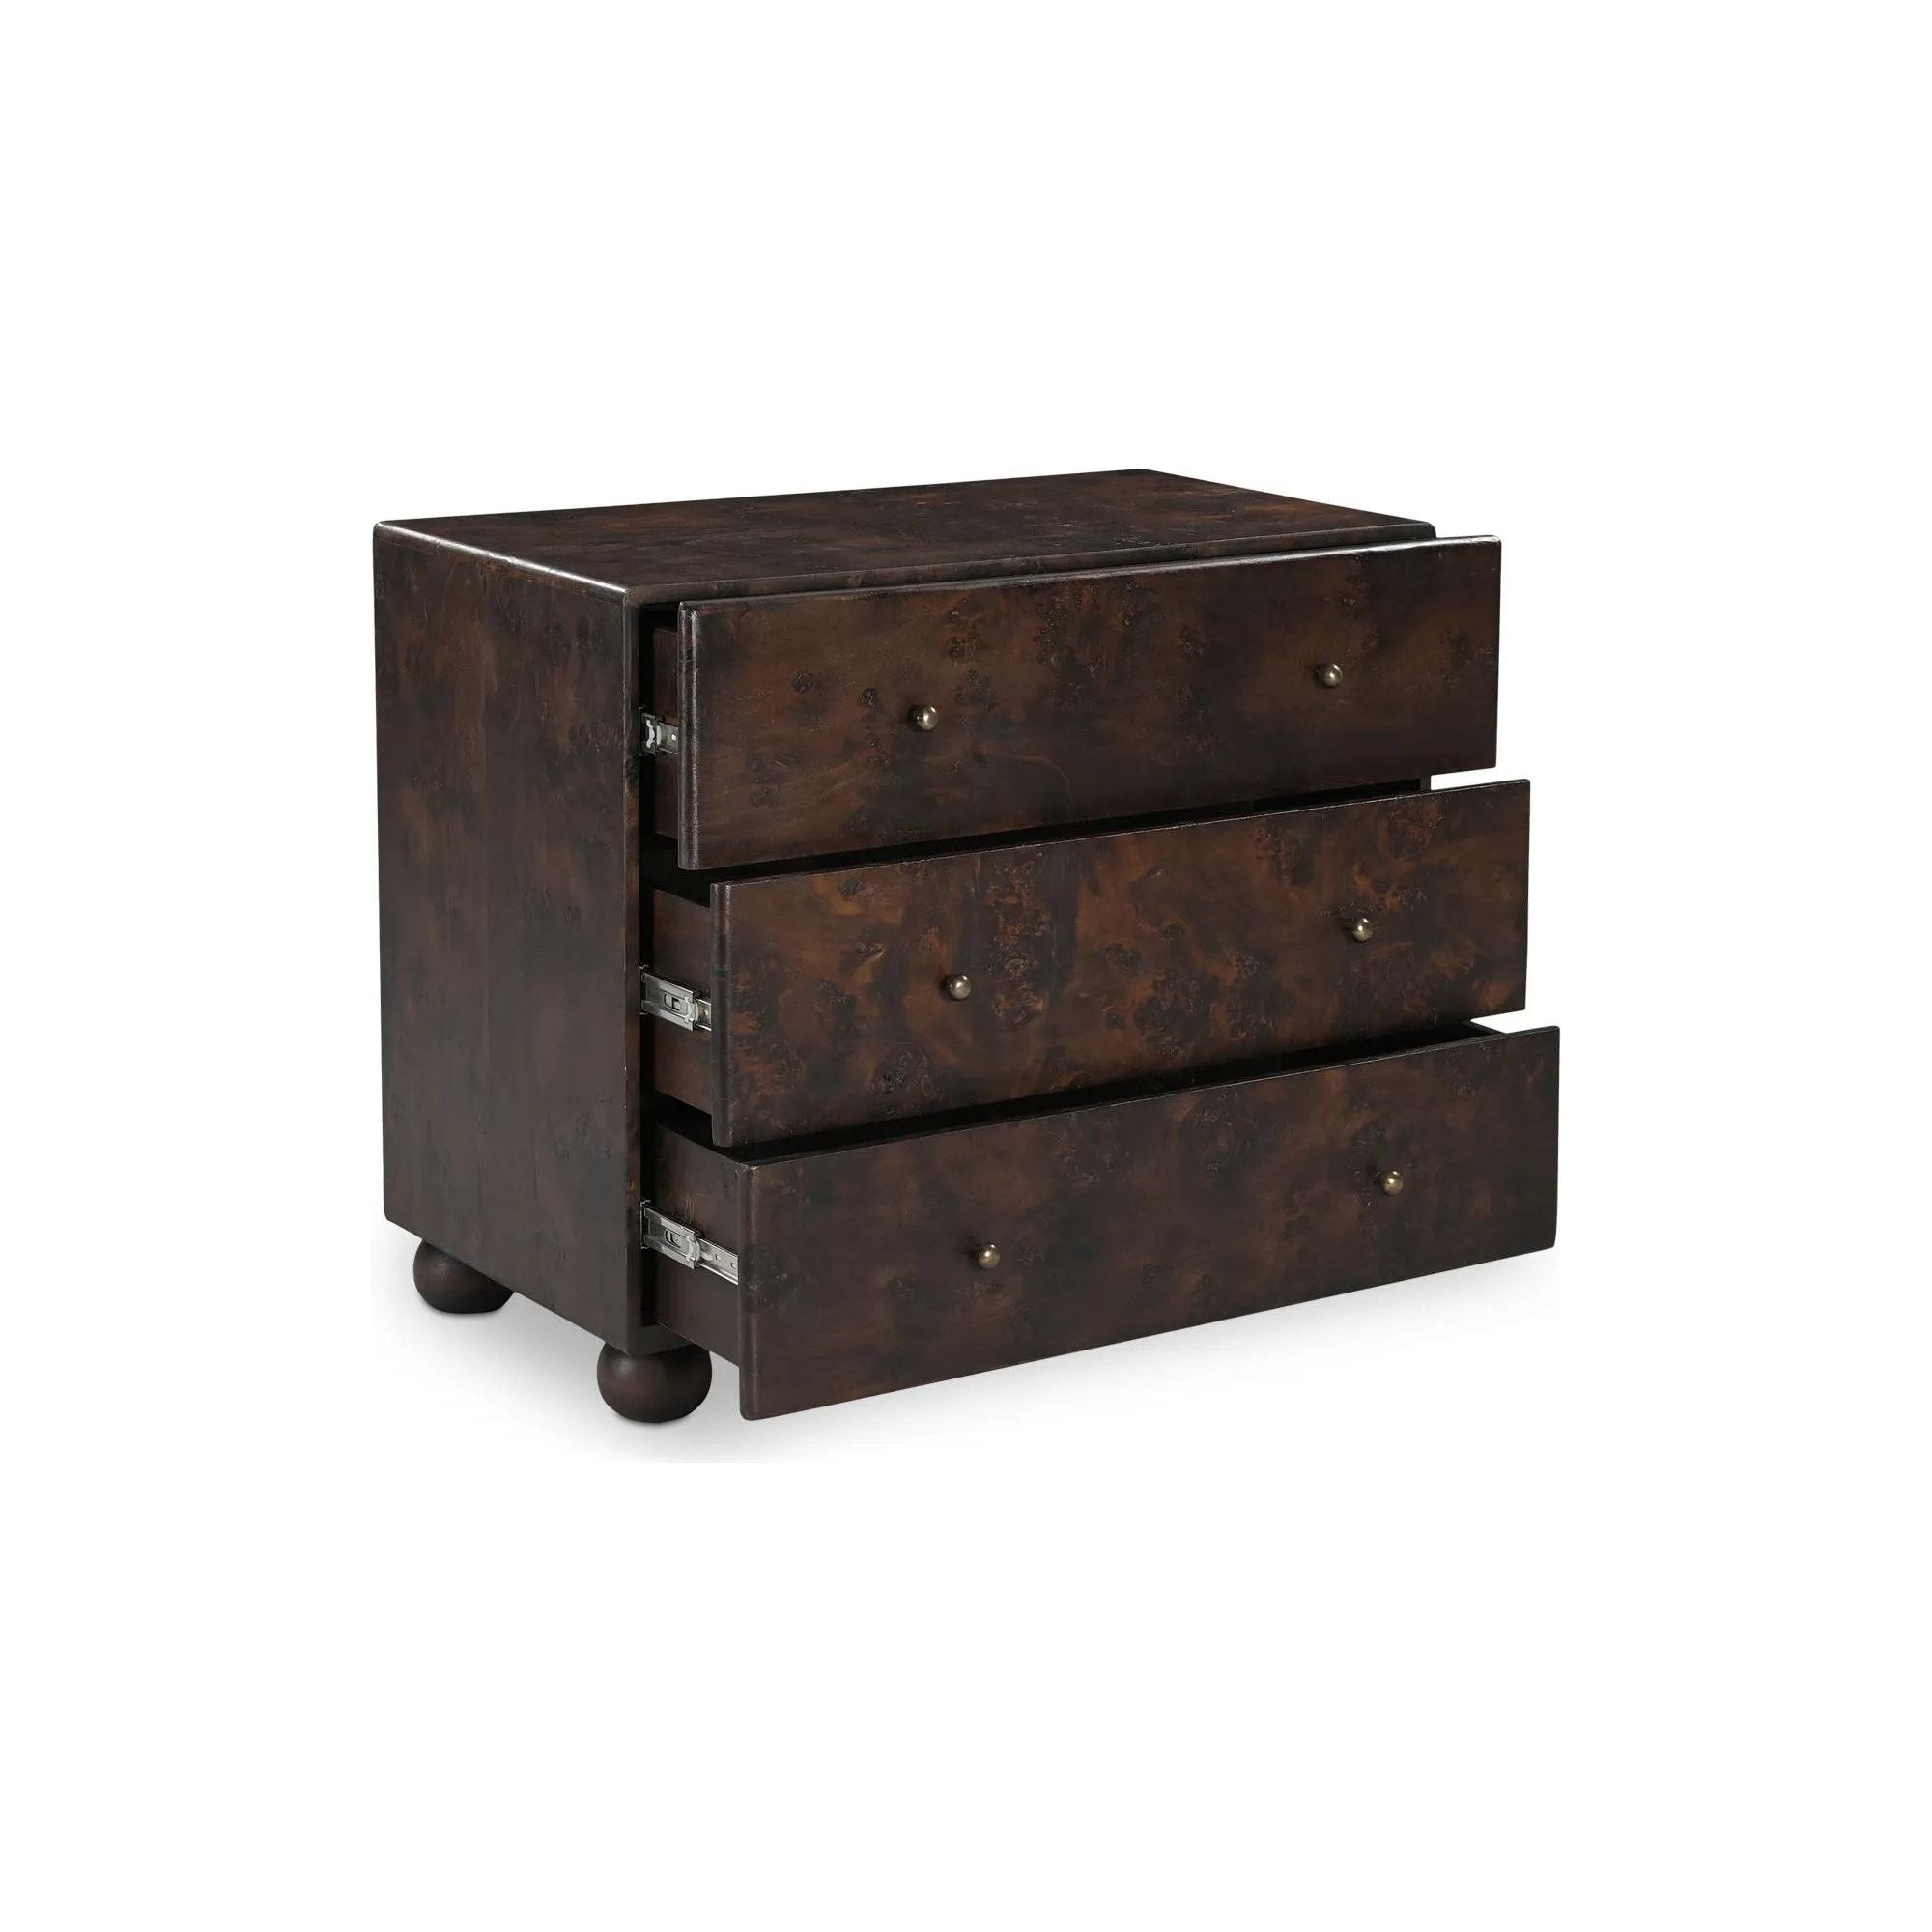 As if it tells a story woven through generations, the York 3-drawer nightstand was born from a profound respect for heritage. Amethyst Home provides interior design, new home construction design consulting, vintage area rugs, and lighting in the Omaha metro area.